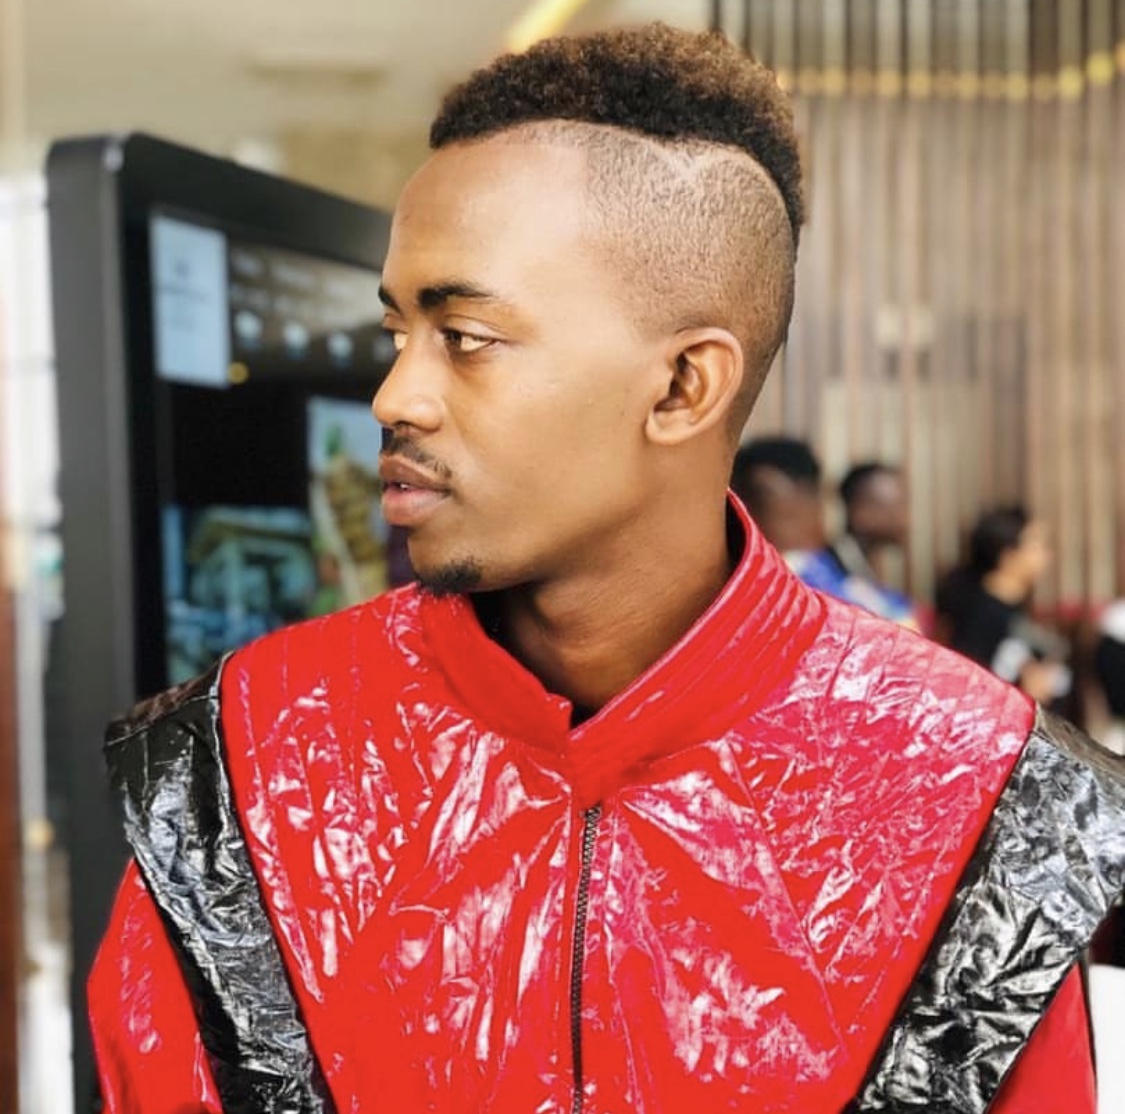 ‘I stole my current girlfriend from my former friend!’ Gospel artist Weezdom proudly confesses